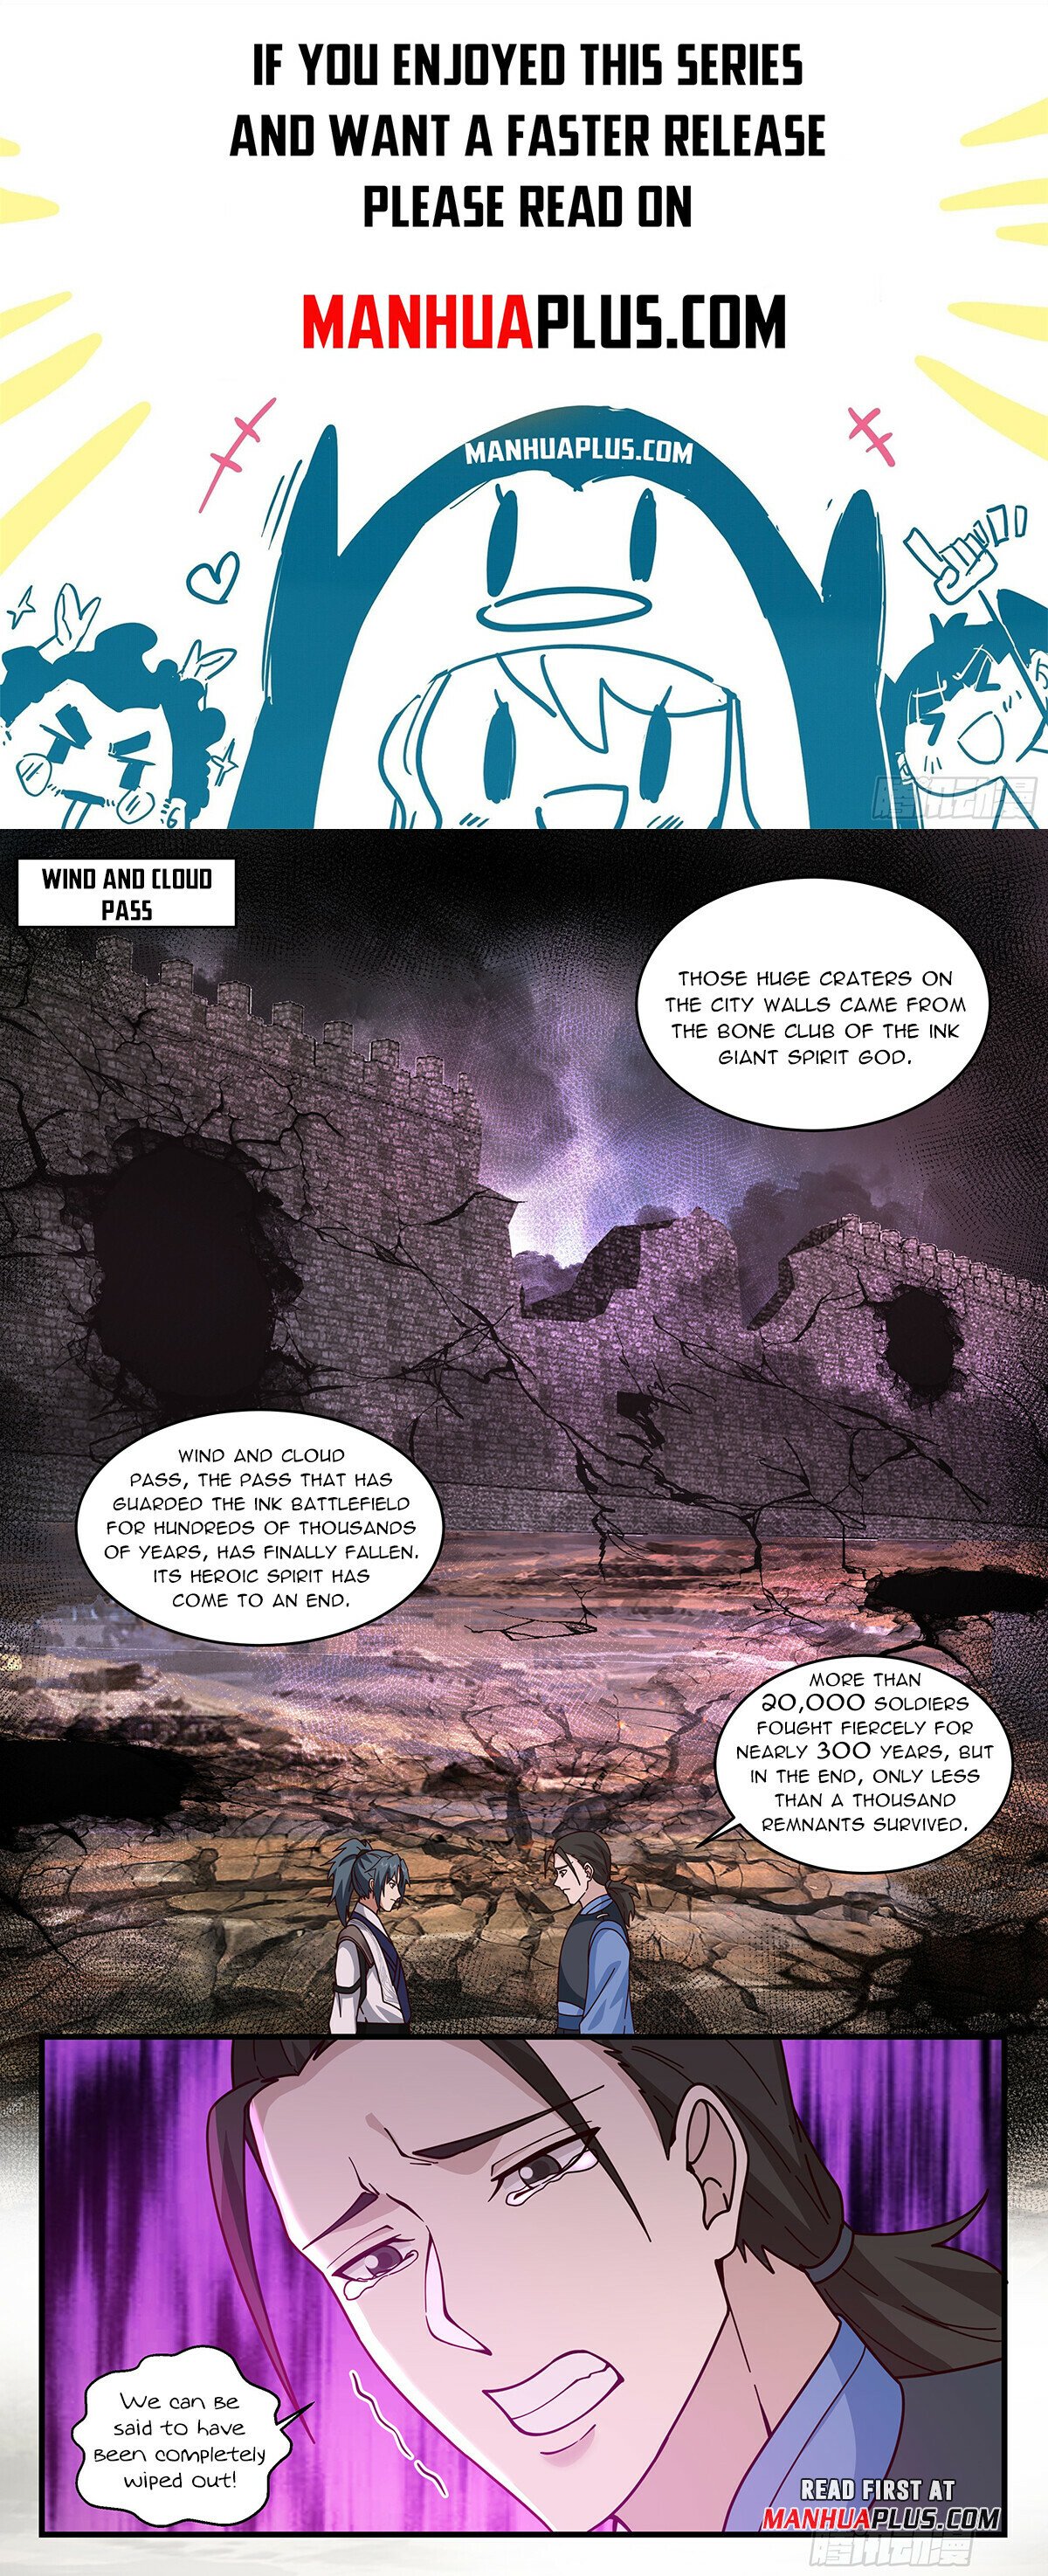 Martial Peak - Chapter 24802 - The Road Ahead - Image 1